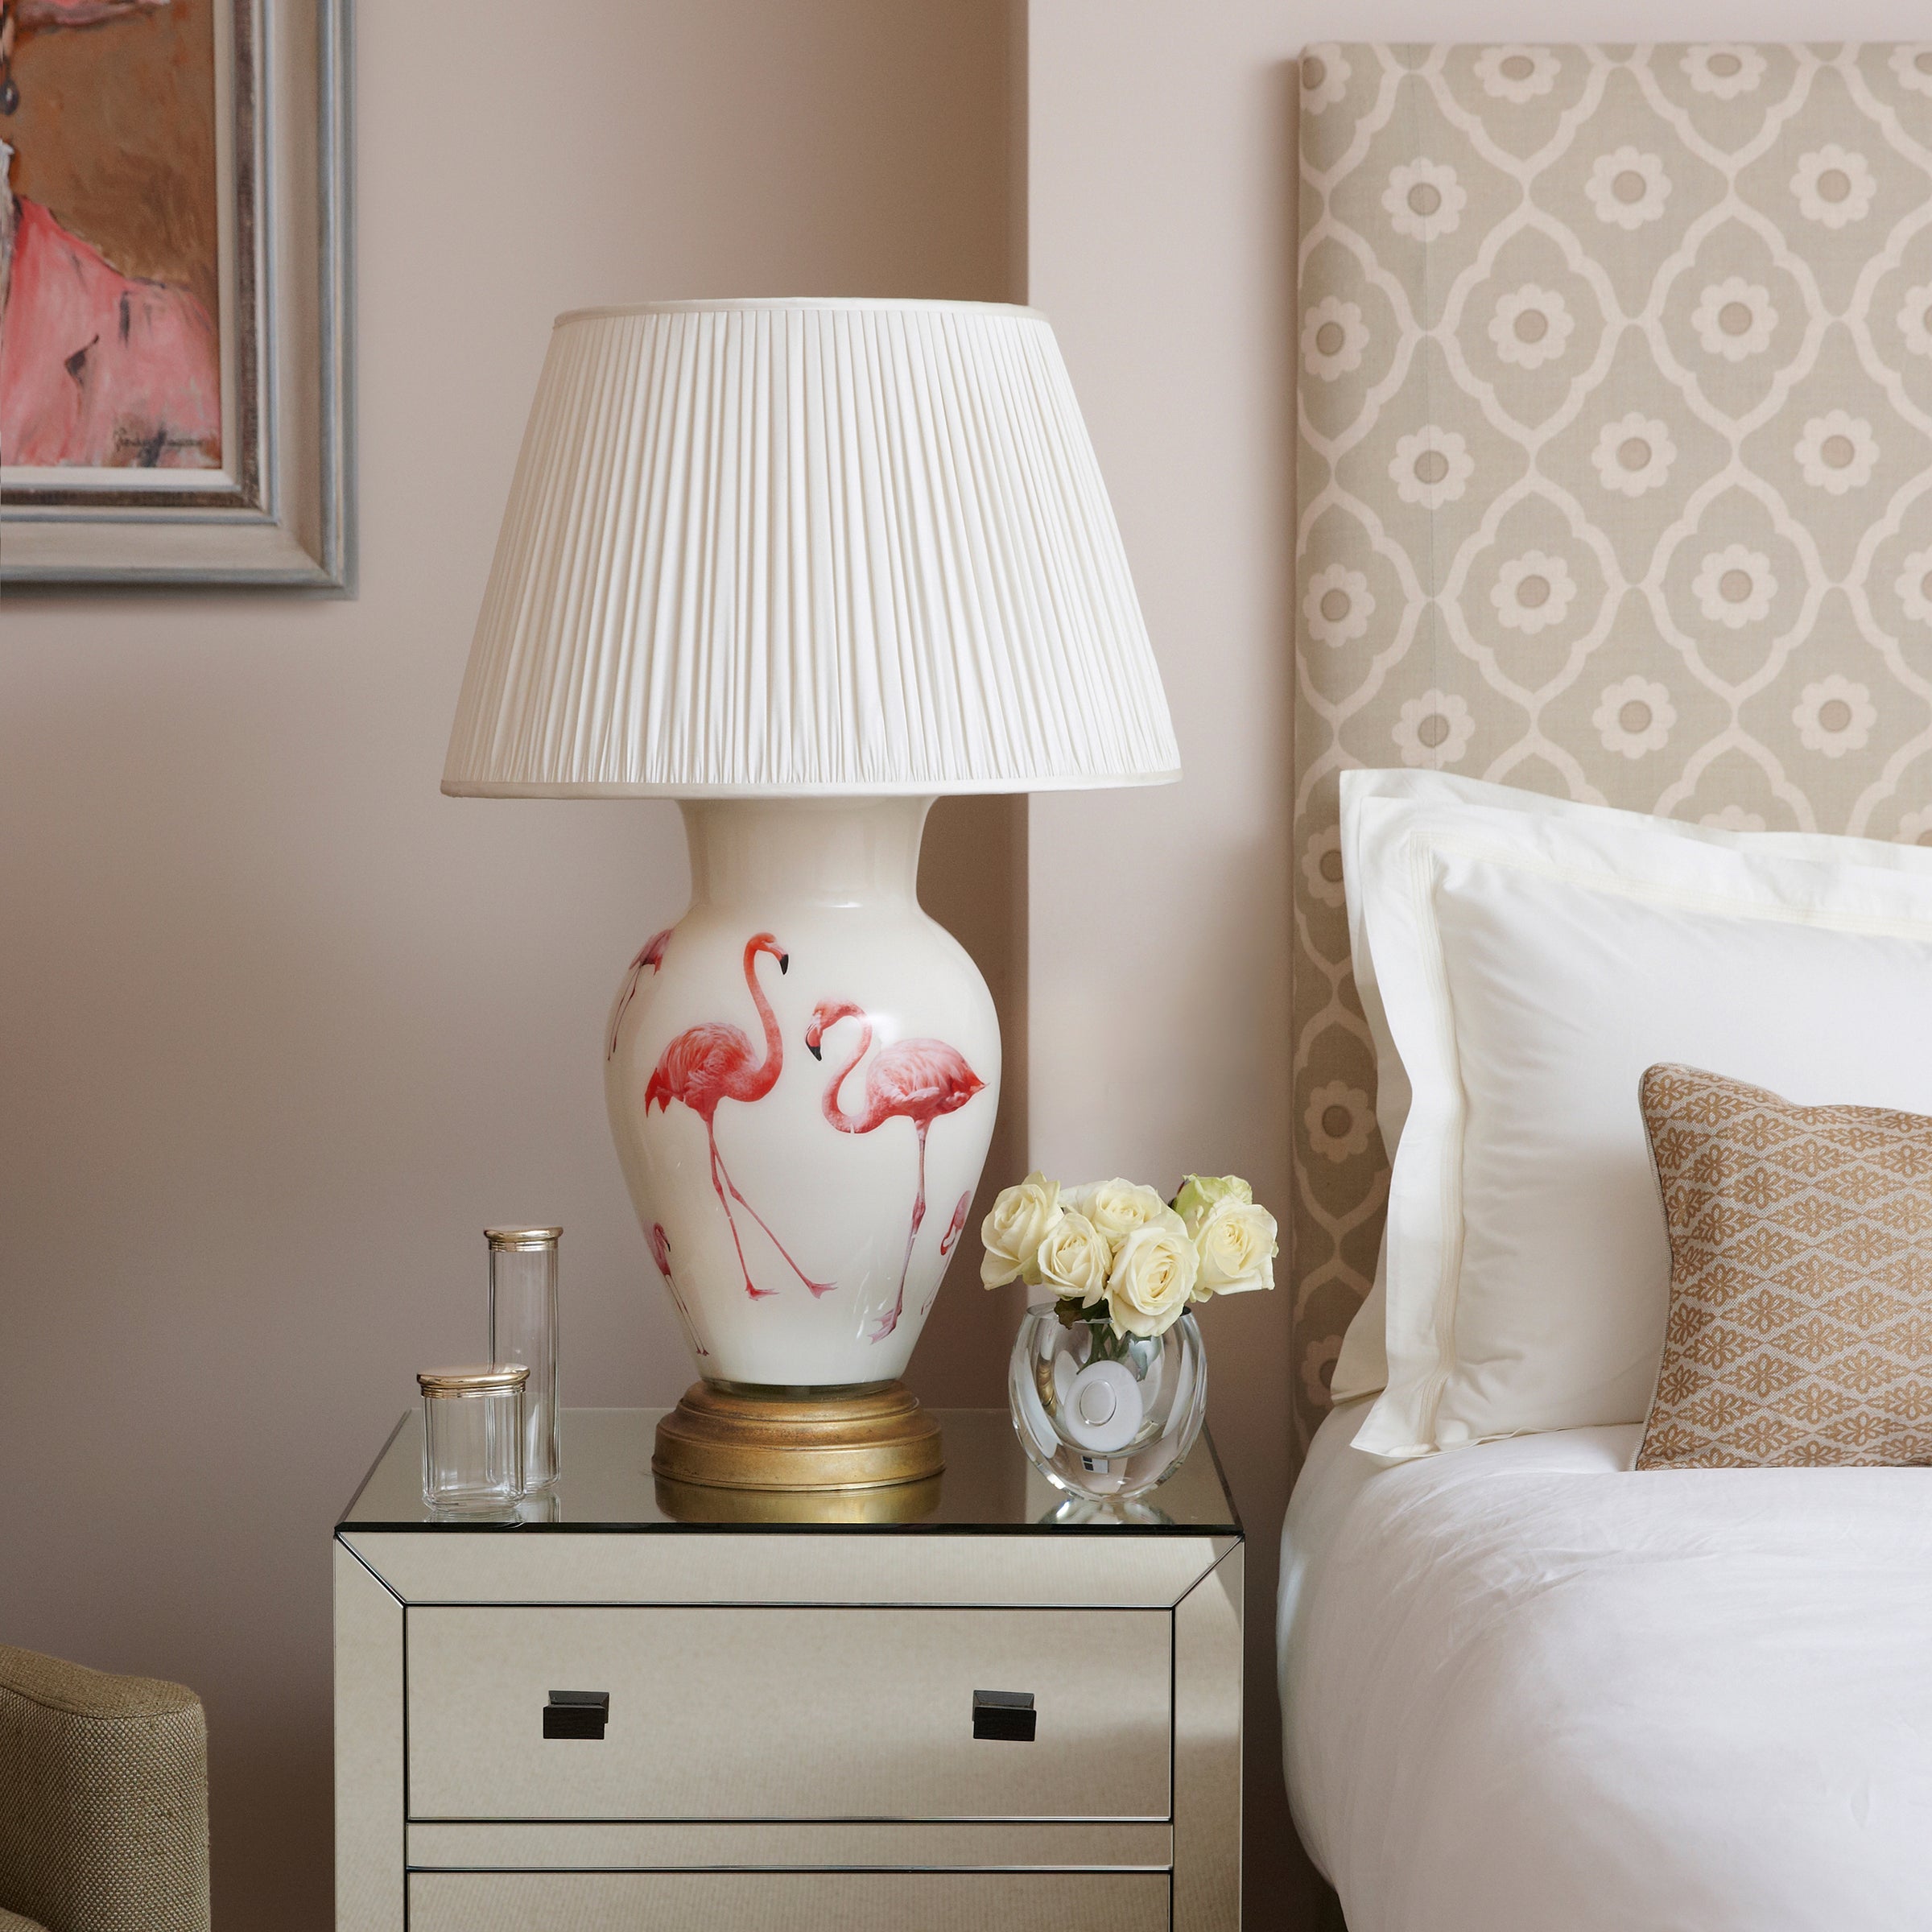 Luxury & Designer Patterned Table Lamps